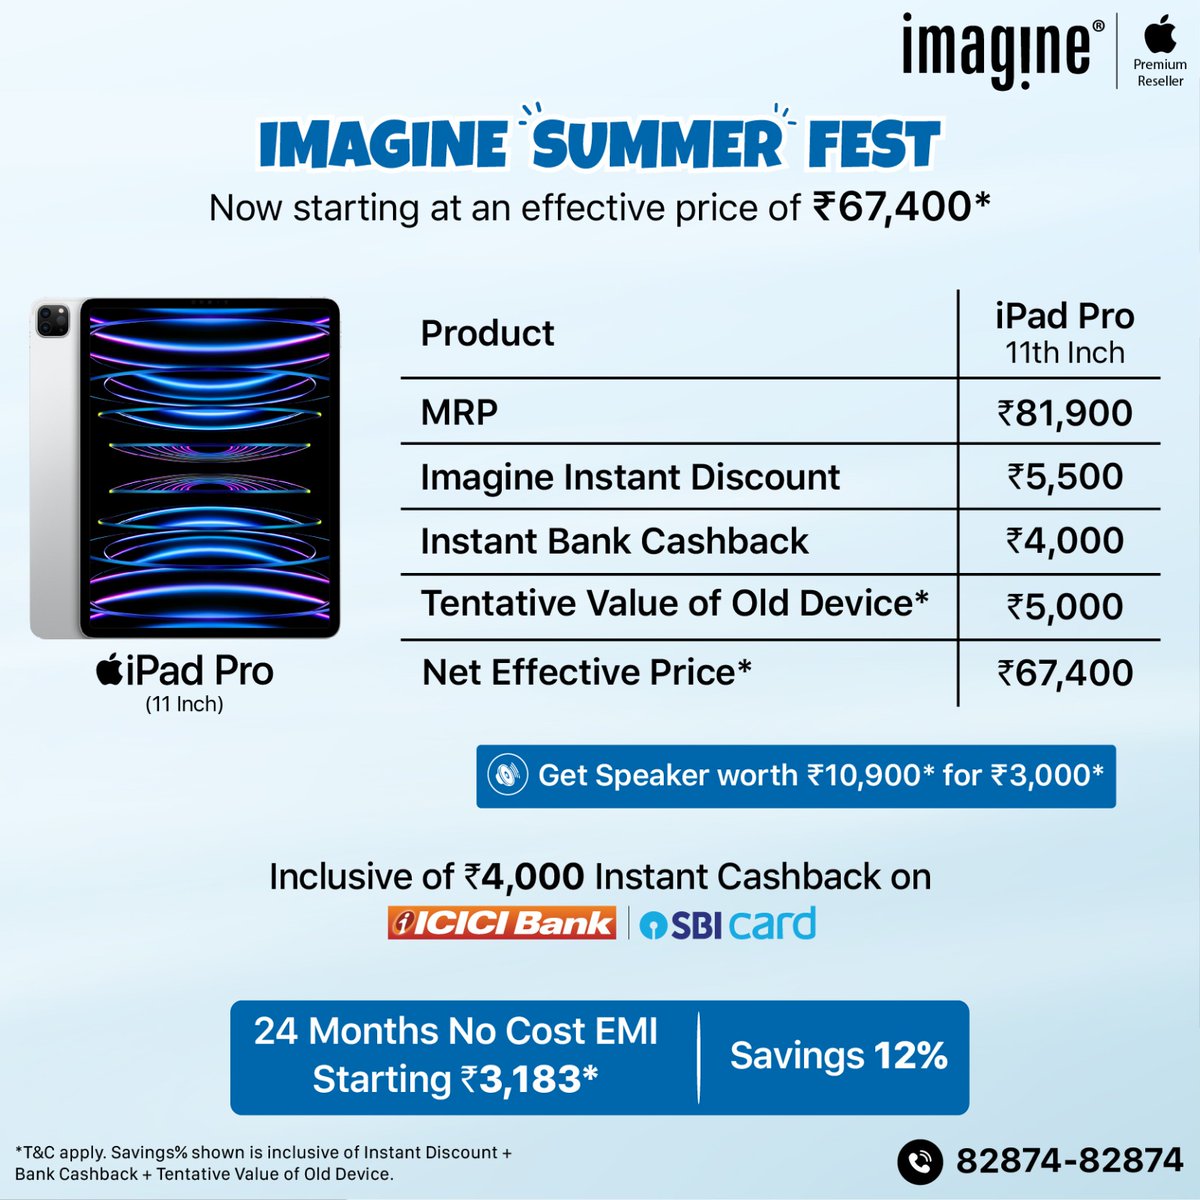 Celebrate Summer at Imagine: Exclusive Apple Deals Await! 🌞 iPad starting at an effective price of ₹22,400* ✅ Upto ₹4,000* Instant Cashback on select banks ✅ Upto ₹6,000* Instant In-store discount ✅ GST Invoice available ✅ Upto 24 Months No Cost EMI available at store